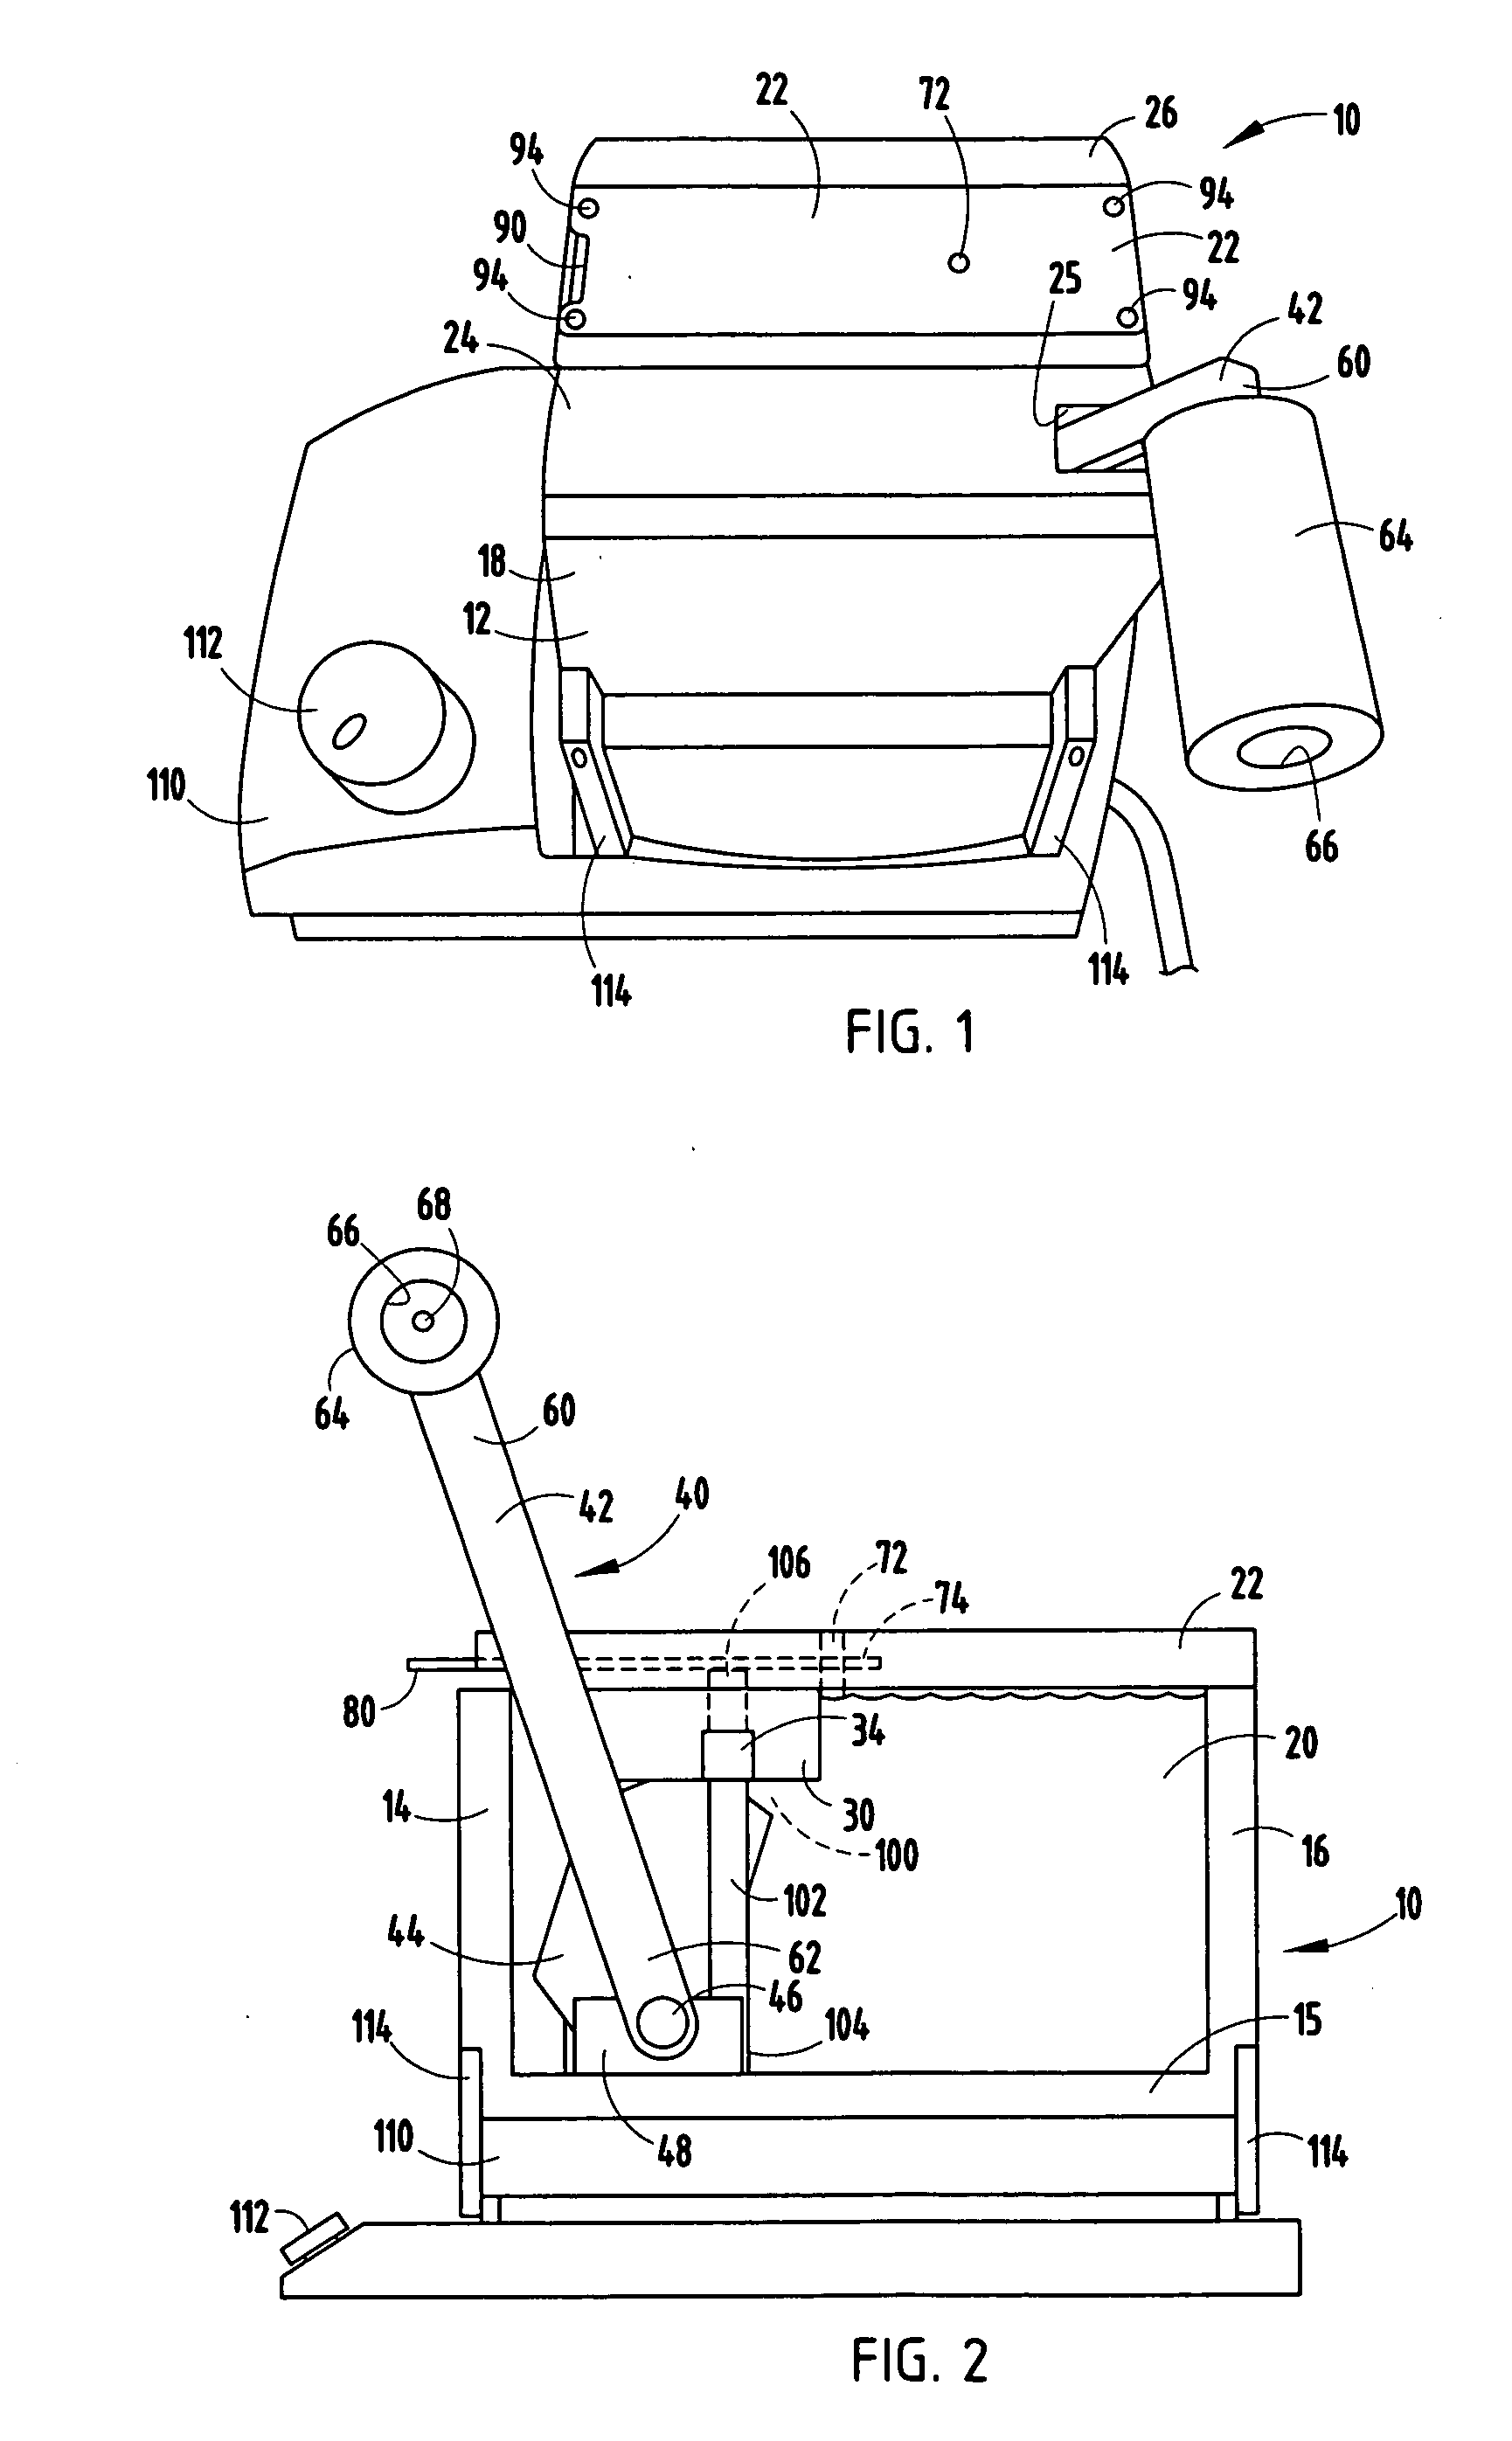 Method and apparatus for making partitioned slides